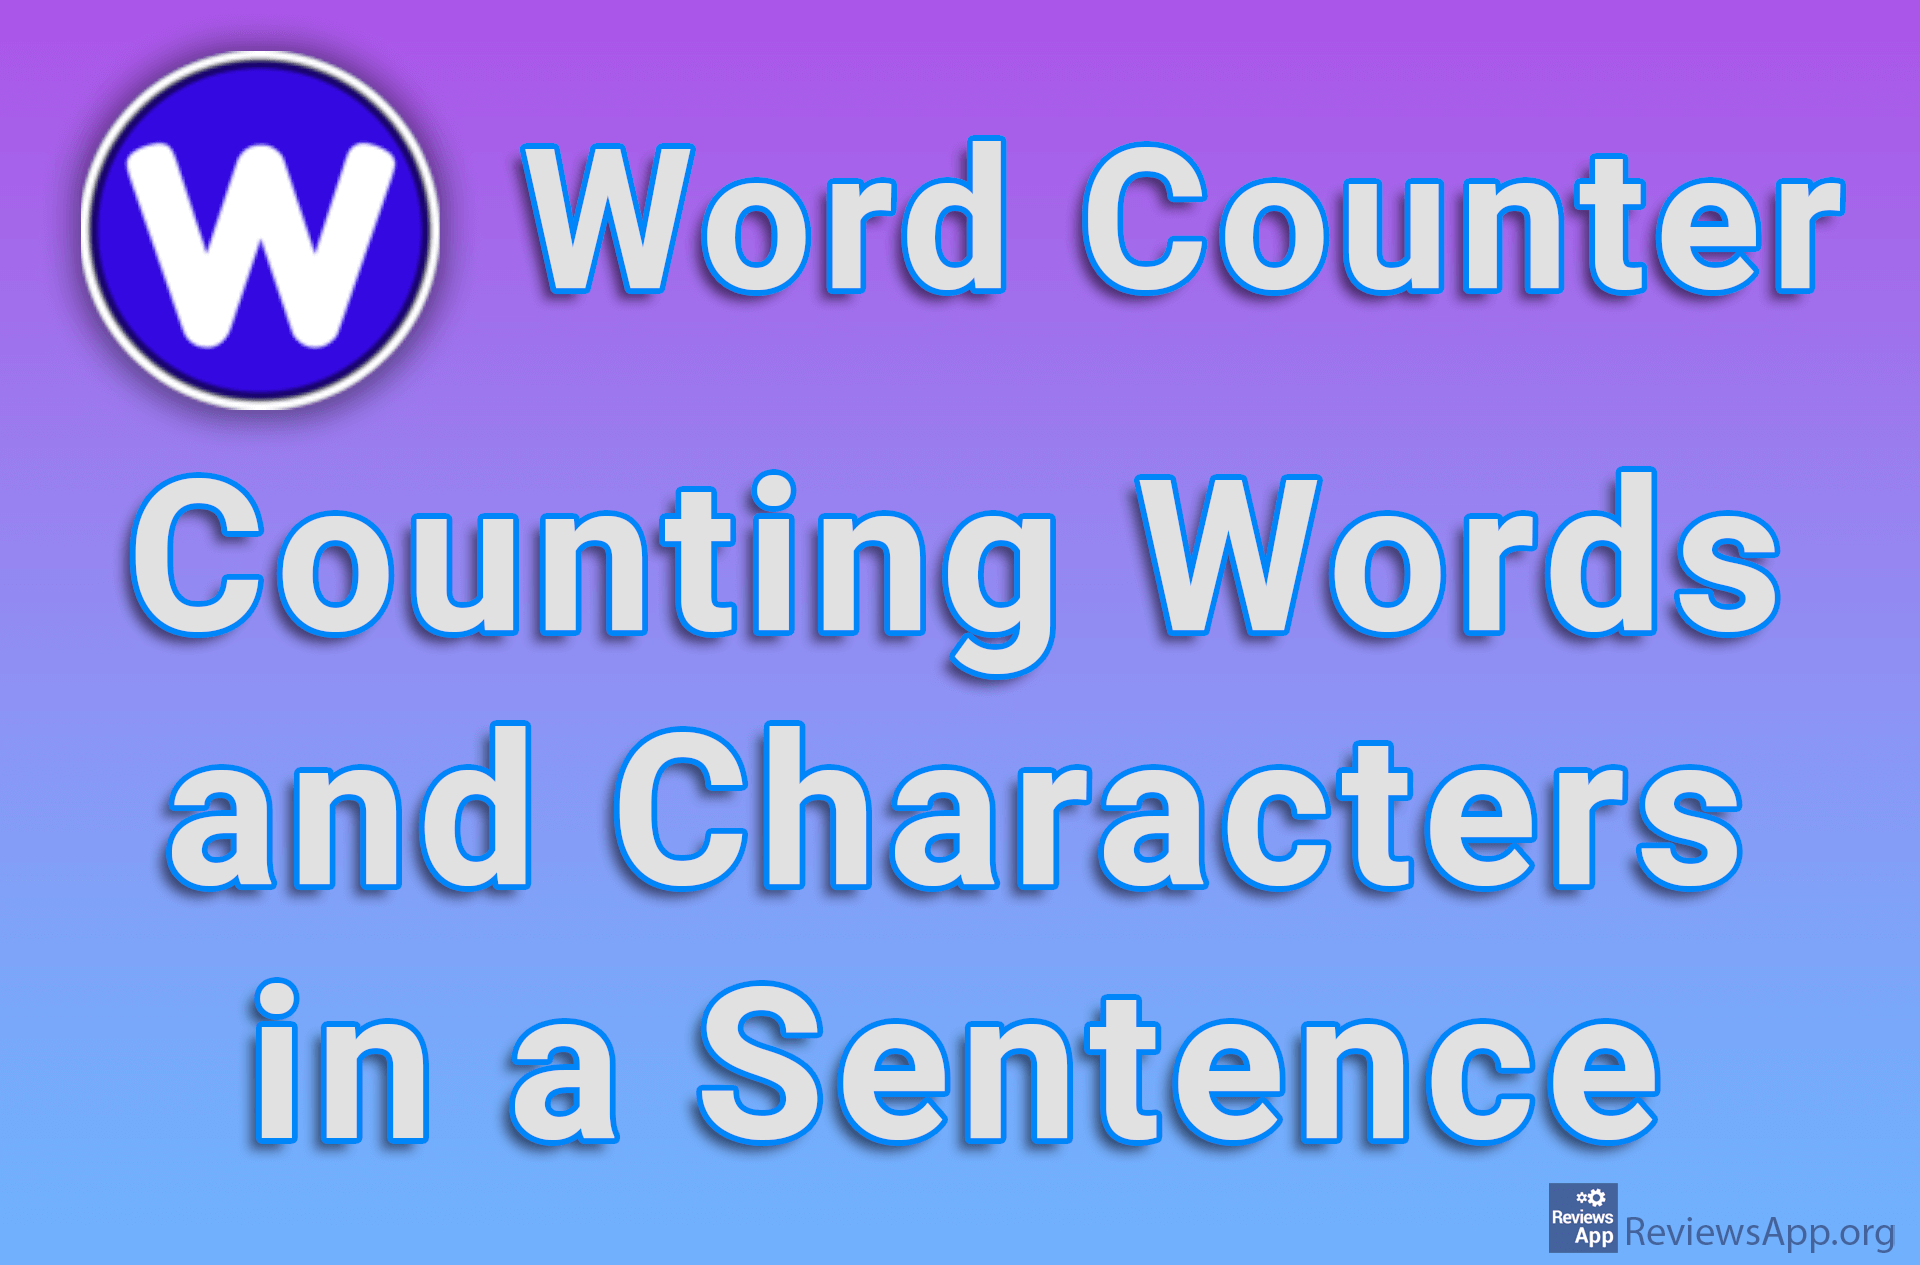 Word Counter – Counting Words and Characters in a Sentence